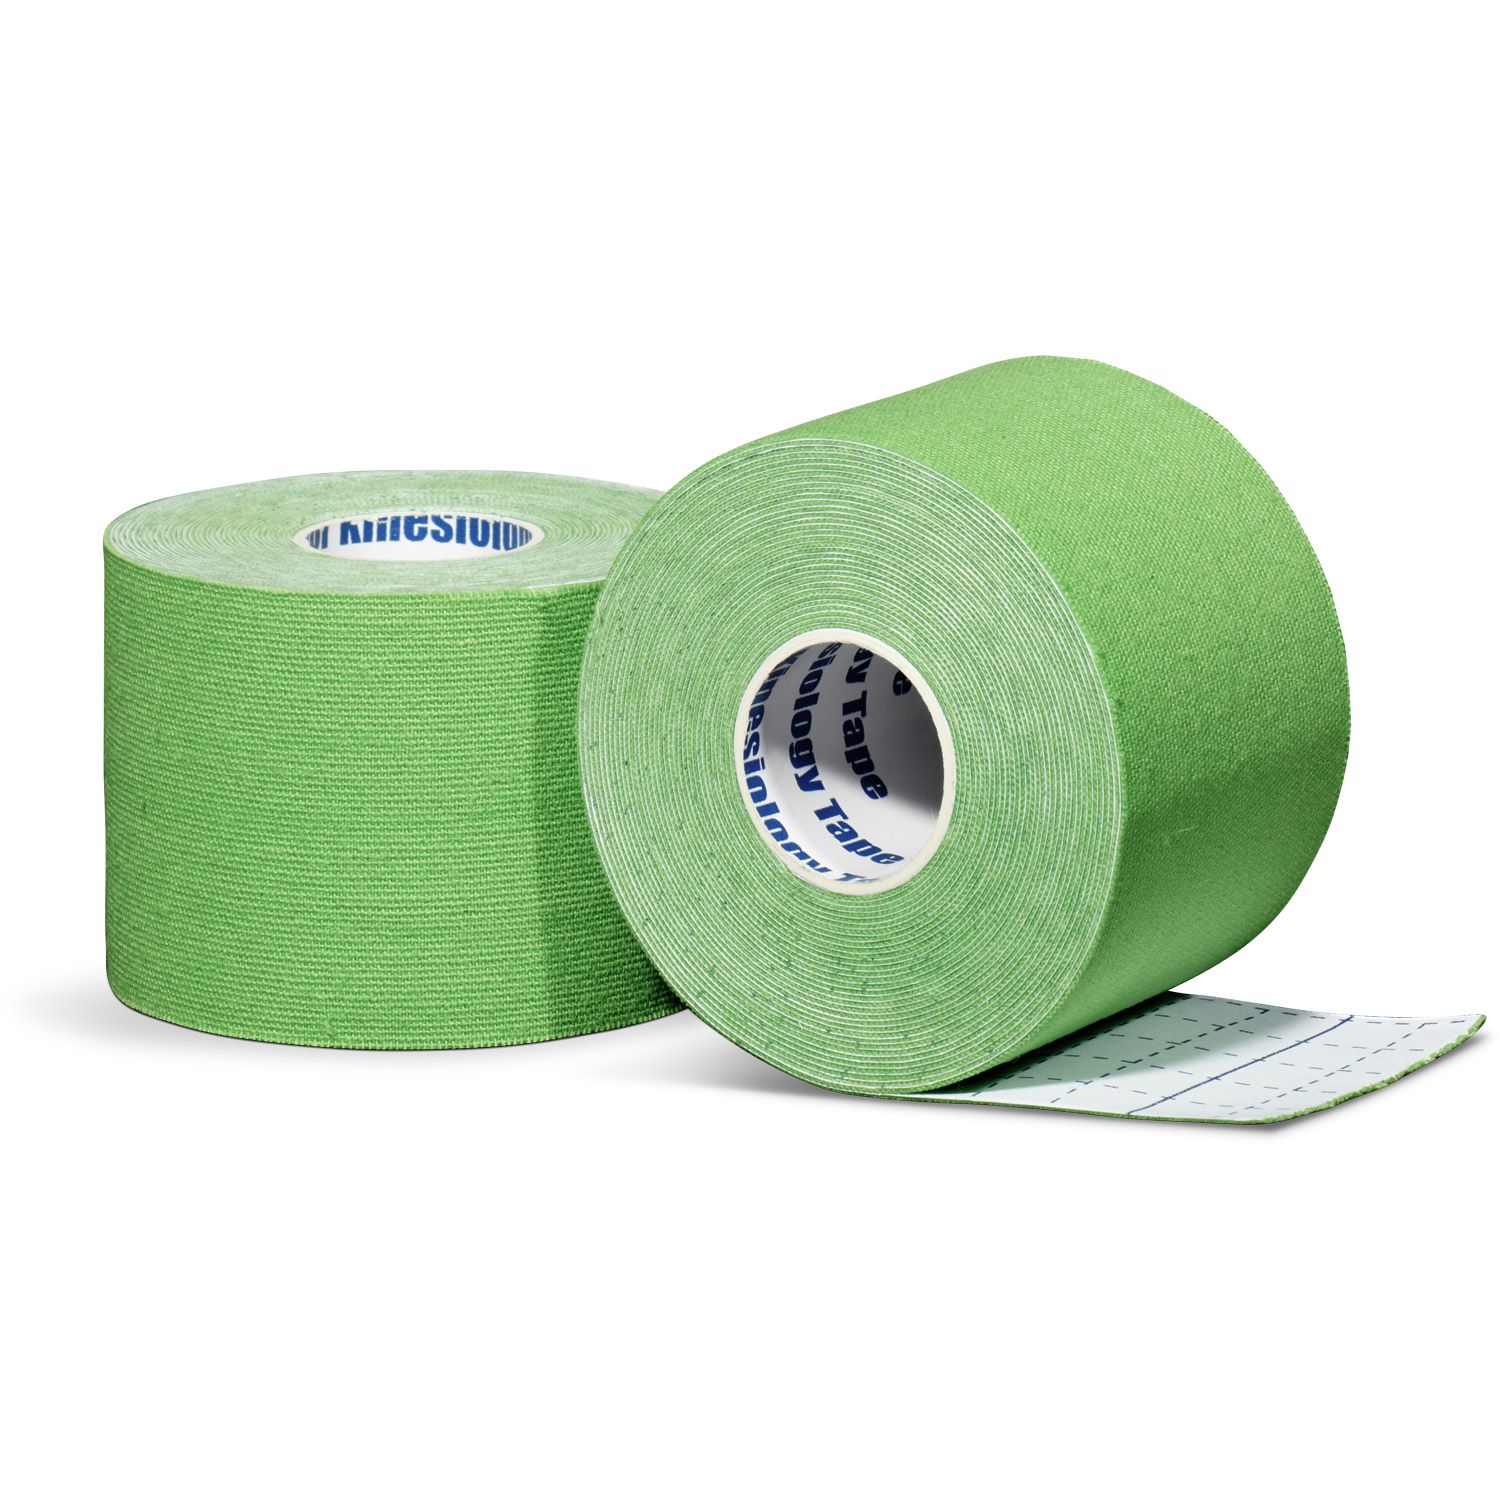 Kinesiology tape per roll green front and back view